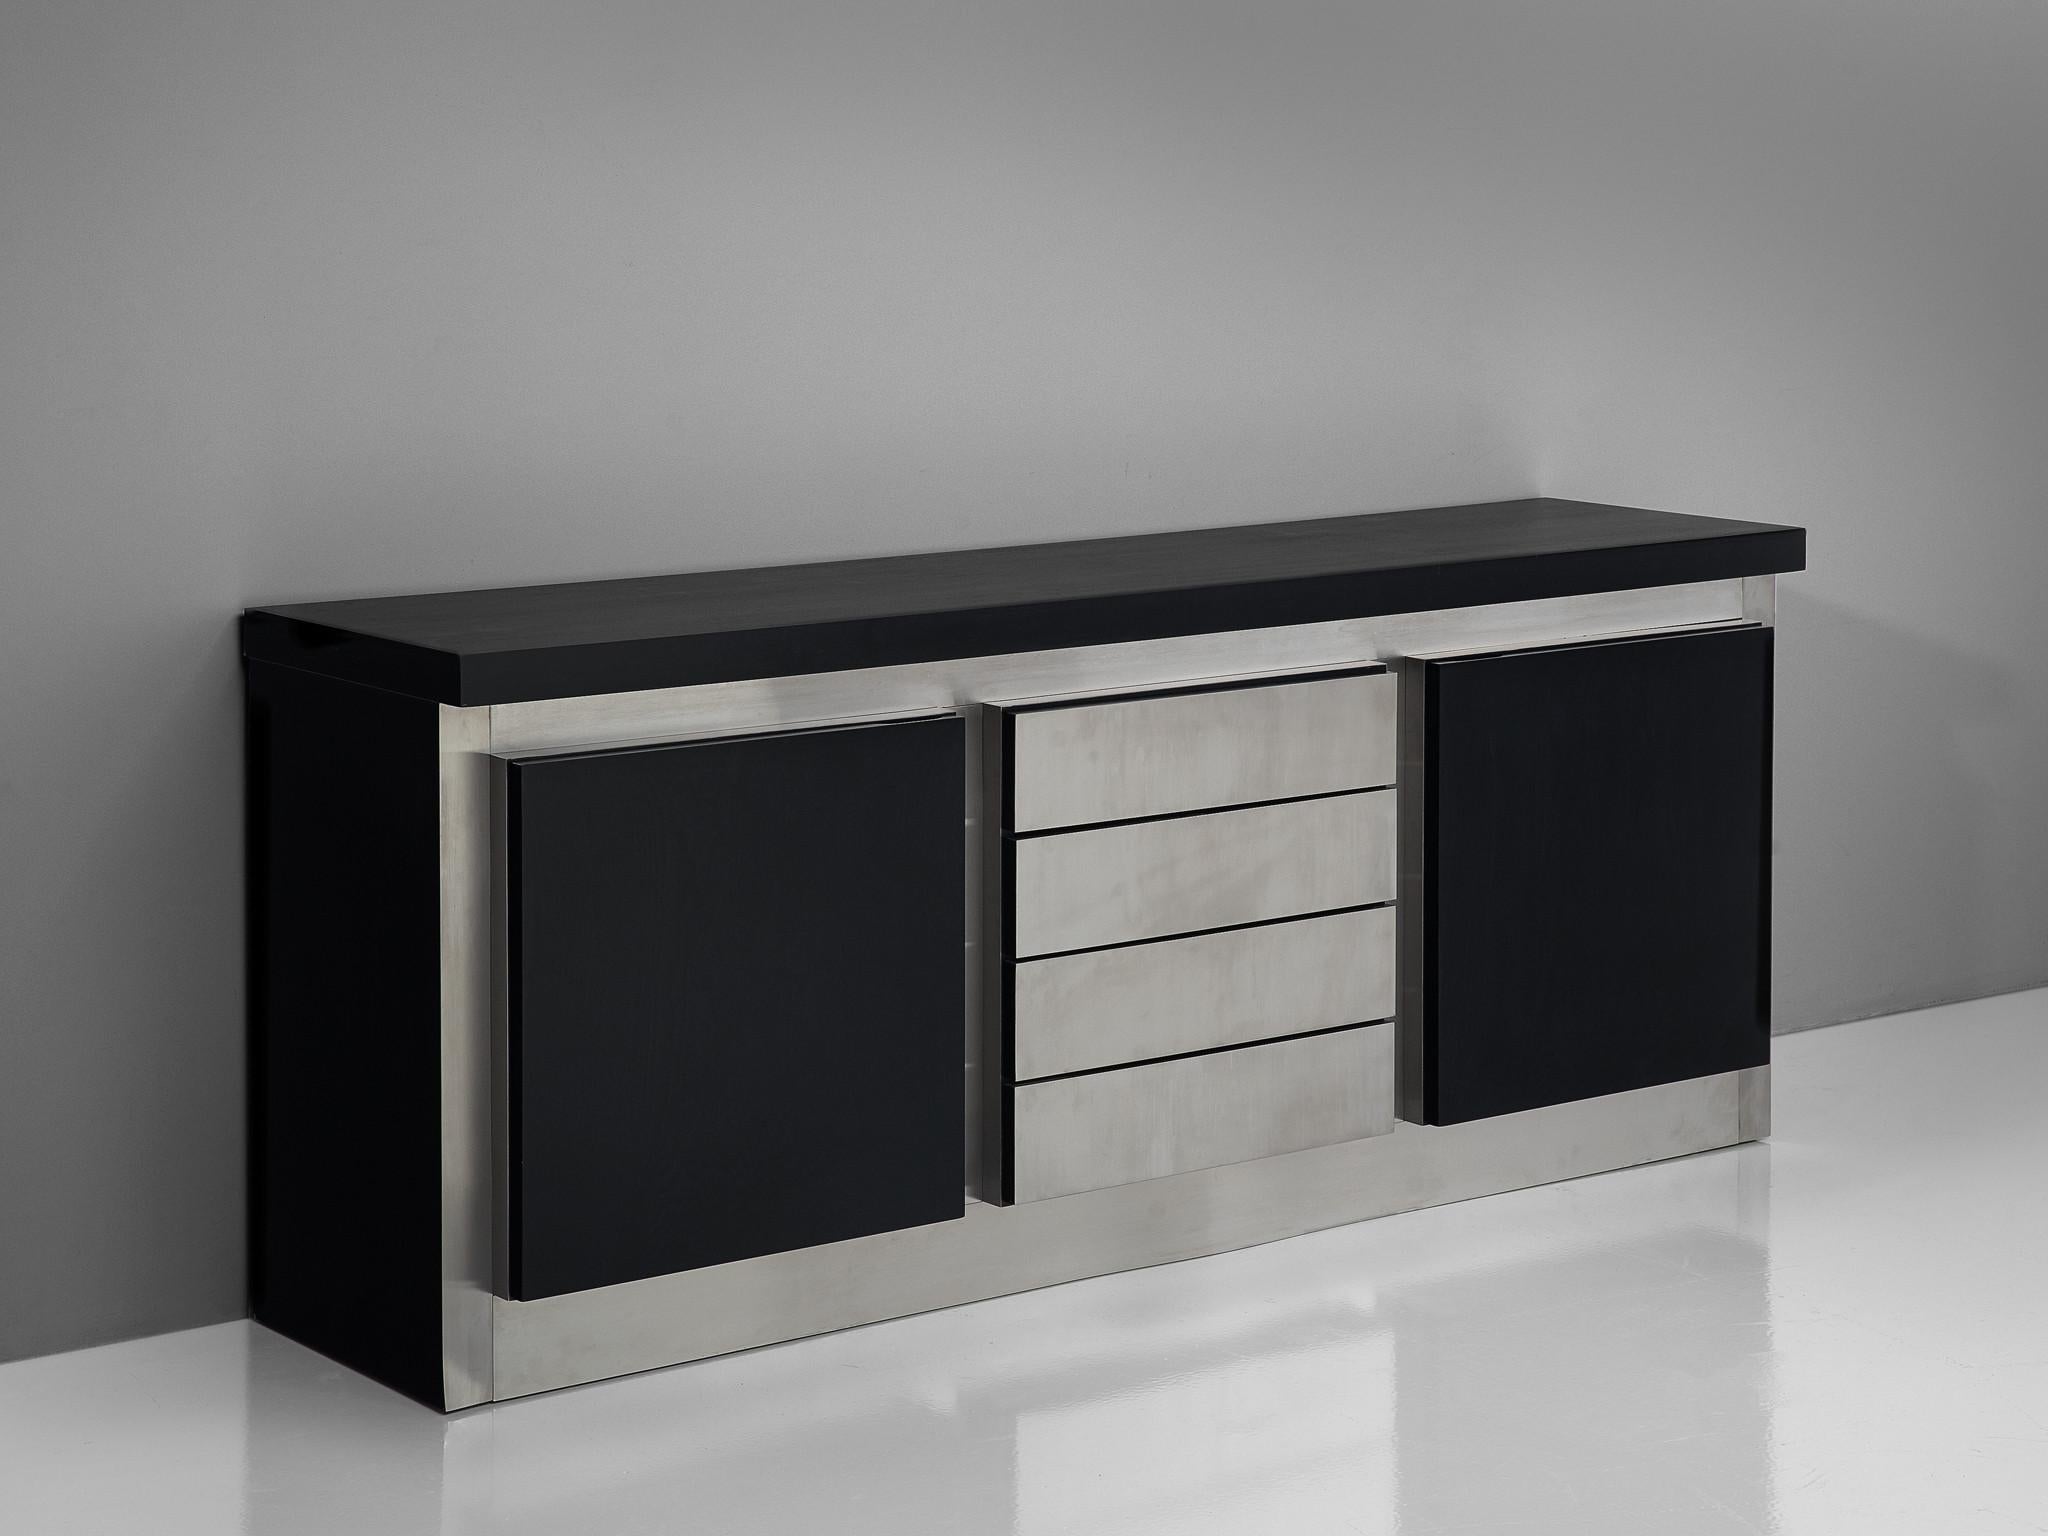 Ludovico Acerbis, sideboard, oak and steel, Italy, 1970s.

Sleek and modern credenza in stainless steel and stained oak is designed by Ludocivo Acerbis (1939). This cabinet has both a contemporary yet monumental appearance. The design is